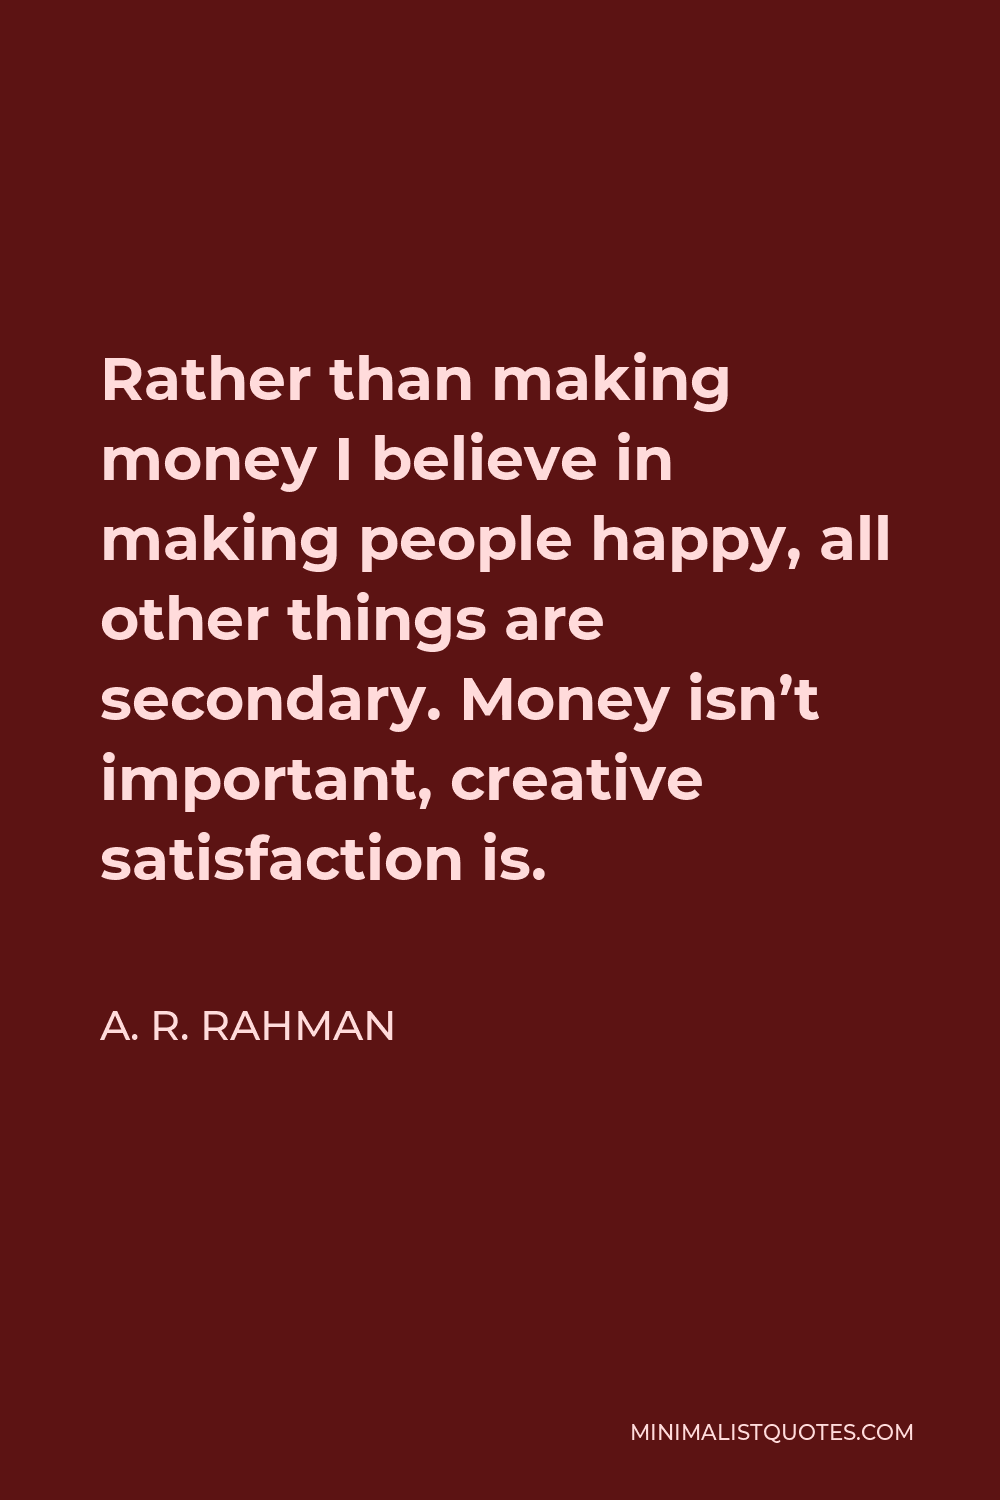 A. R. Rahman Quote - Rather than making money I believe in making people happy, all other things are secondary. Money isn’t important, creative satisfaction is.